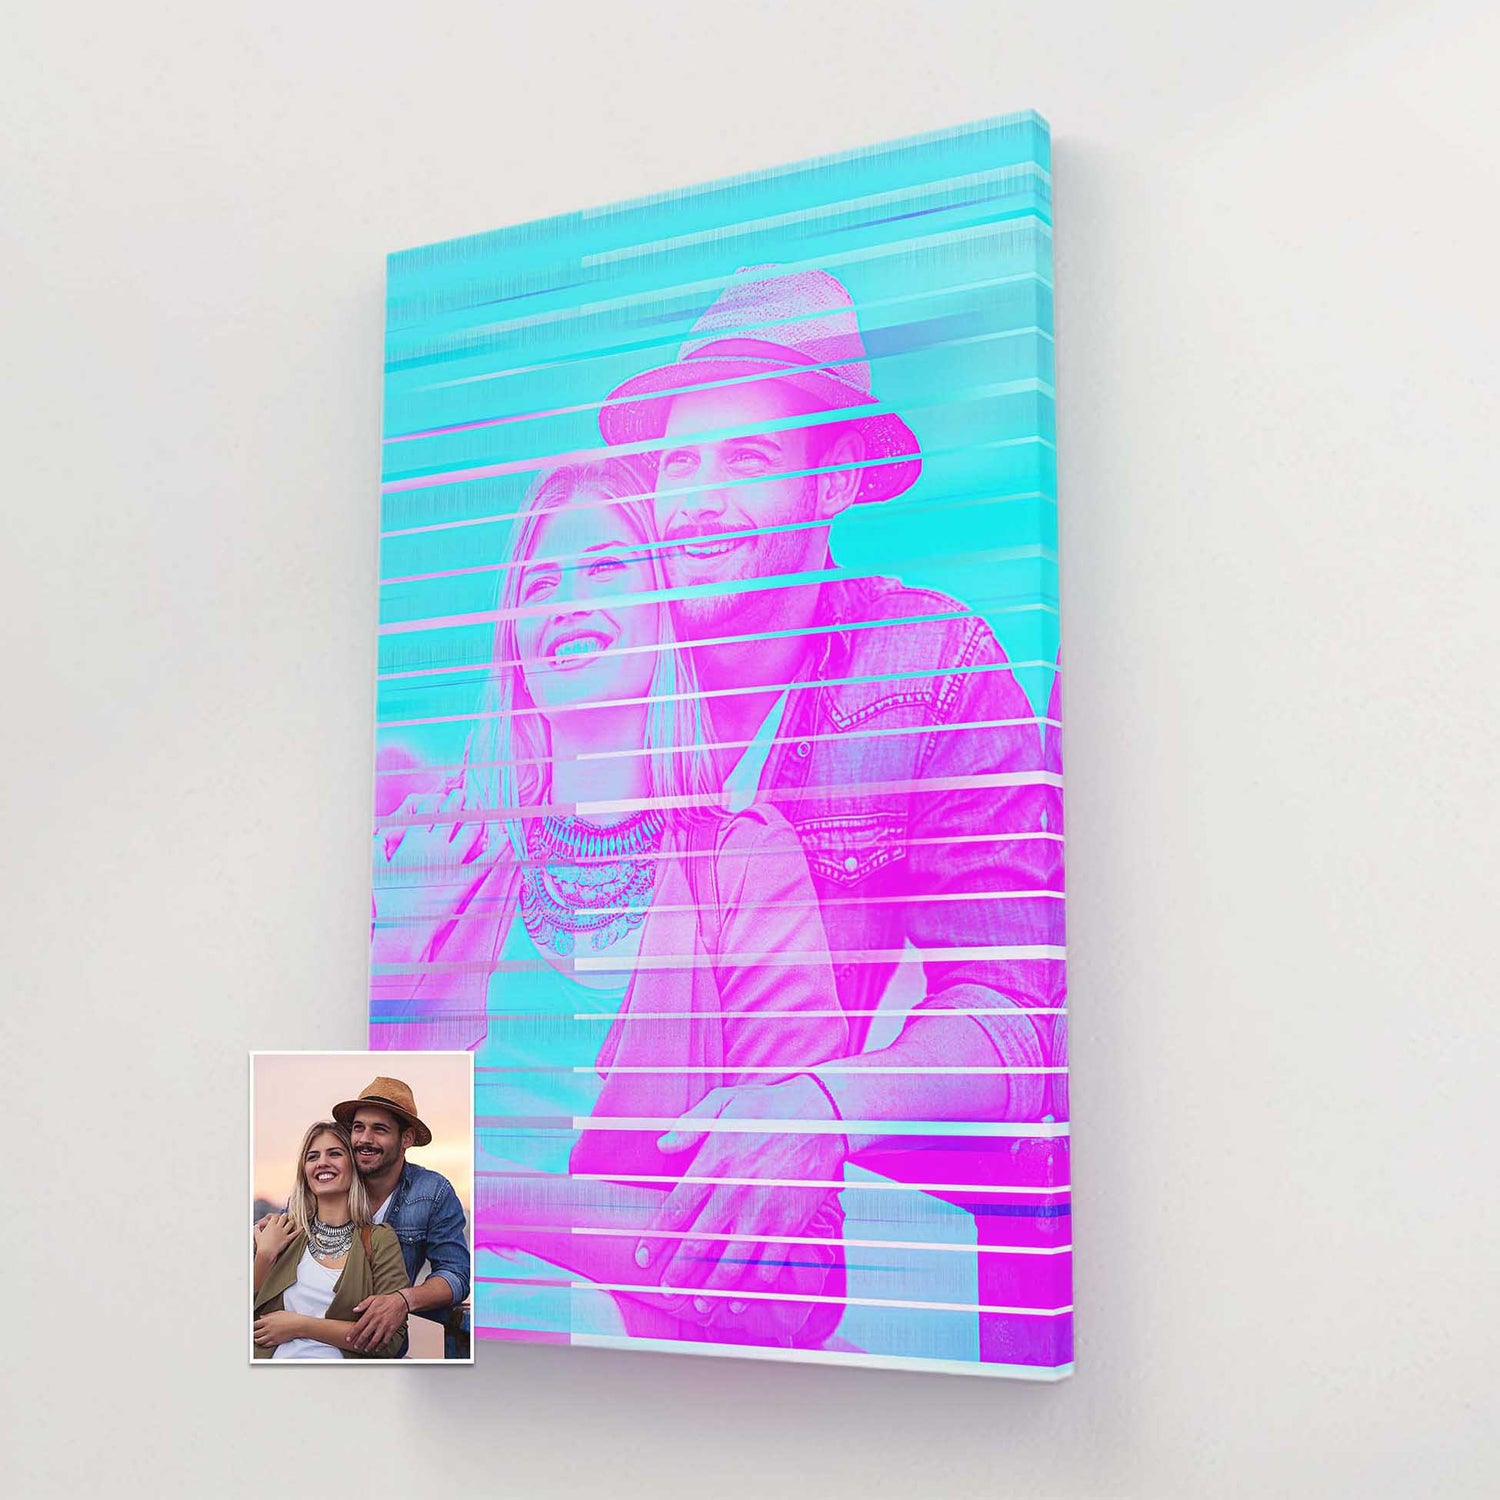 Indulge in the beauty of Personalized Luxury with our Abstract Canvas Collection. Each print is meticulously crafted from your photo, create a stunning and meaningful gift